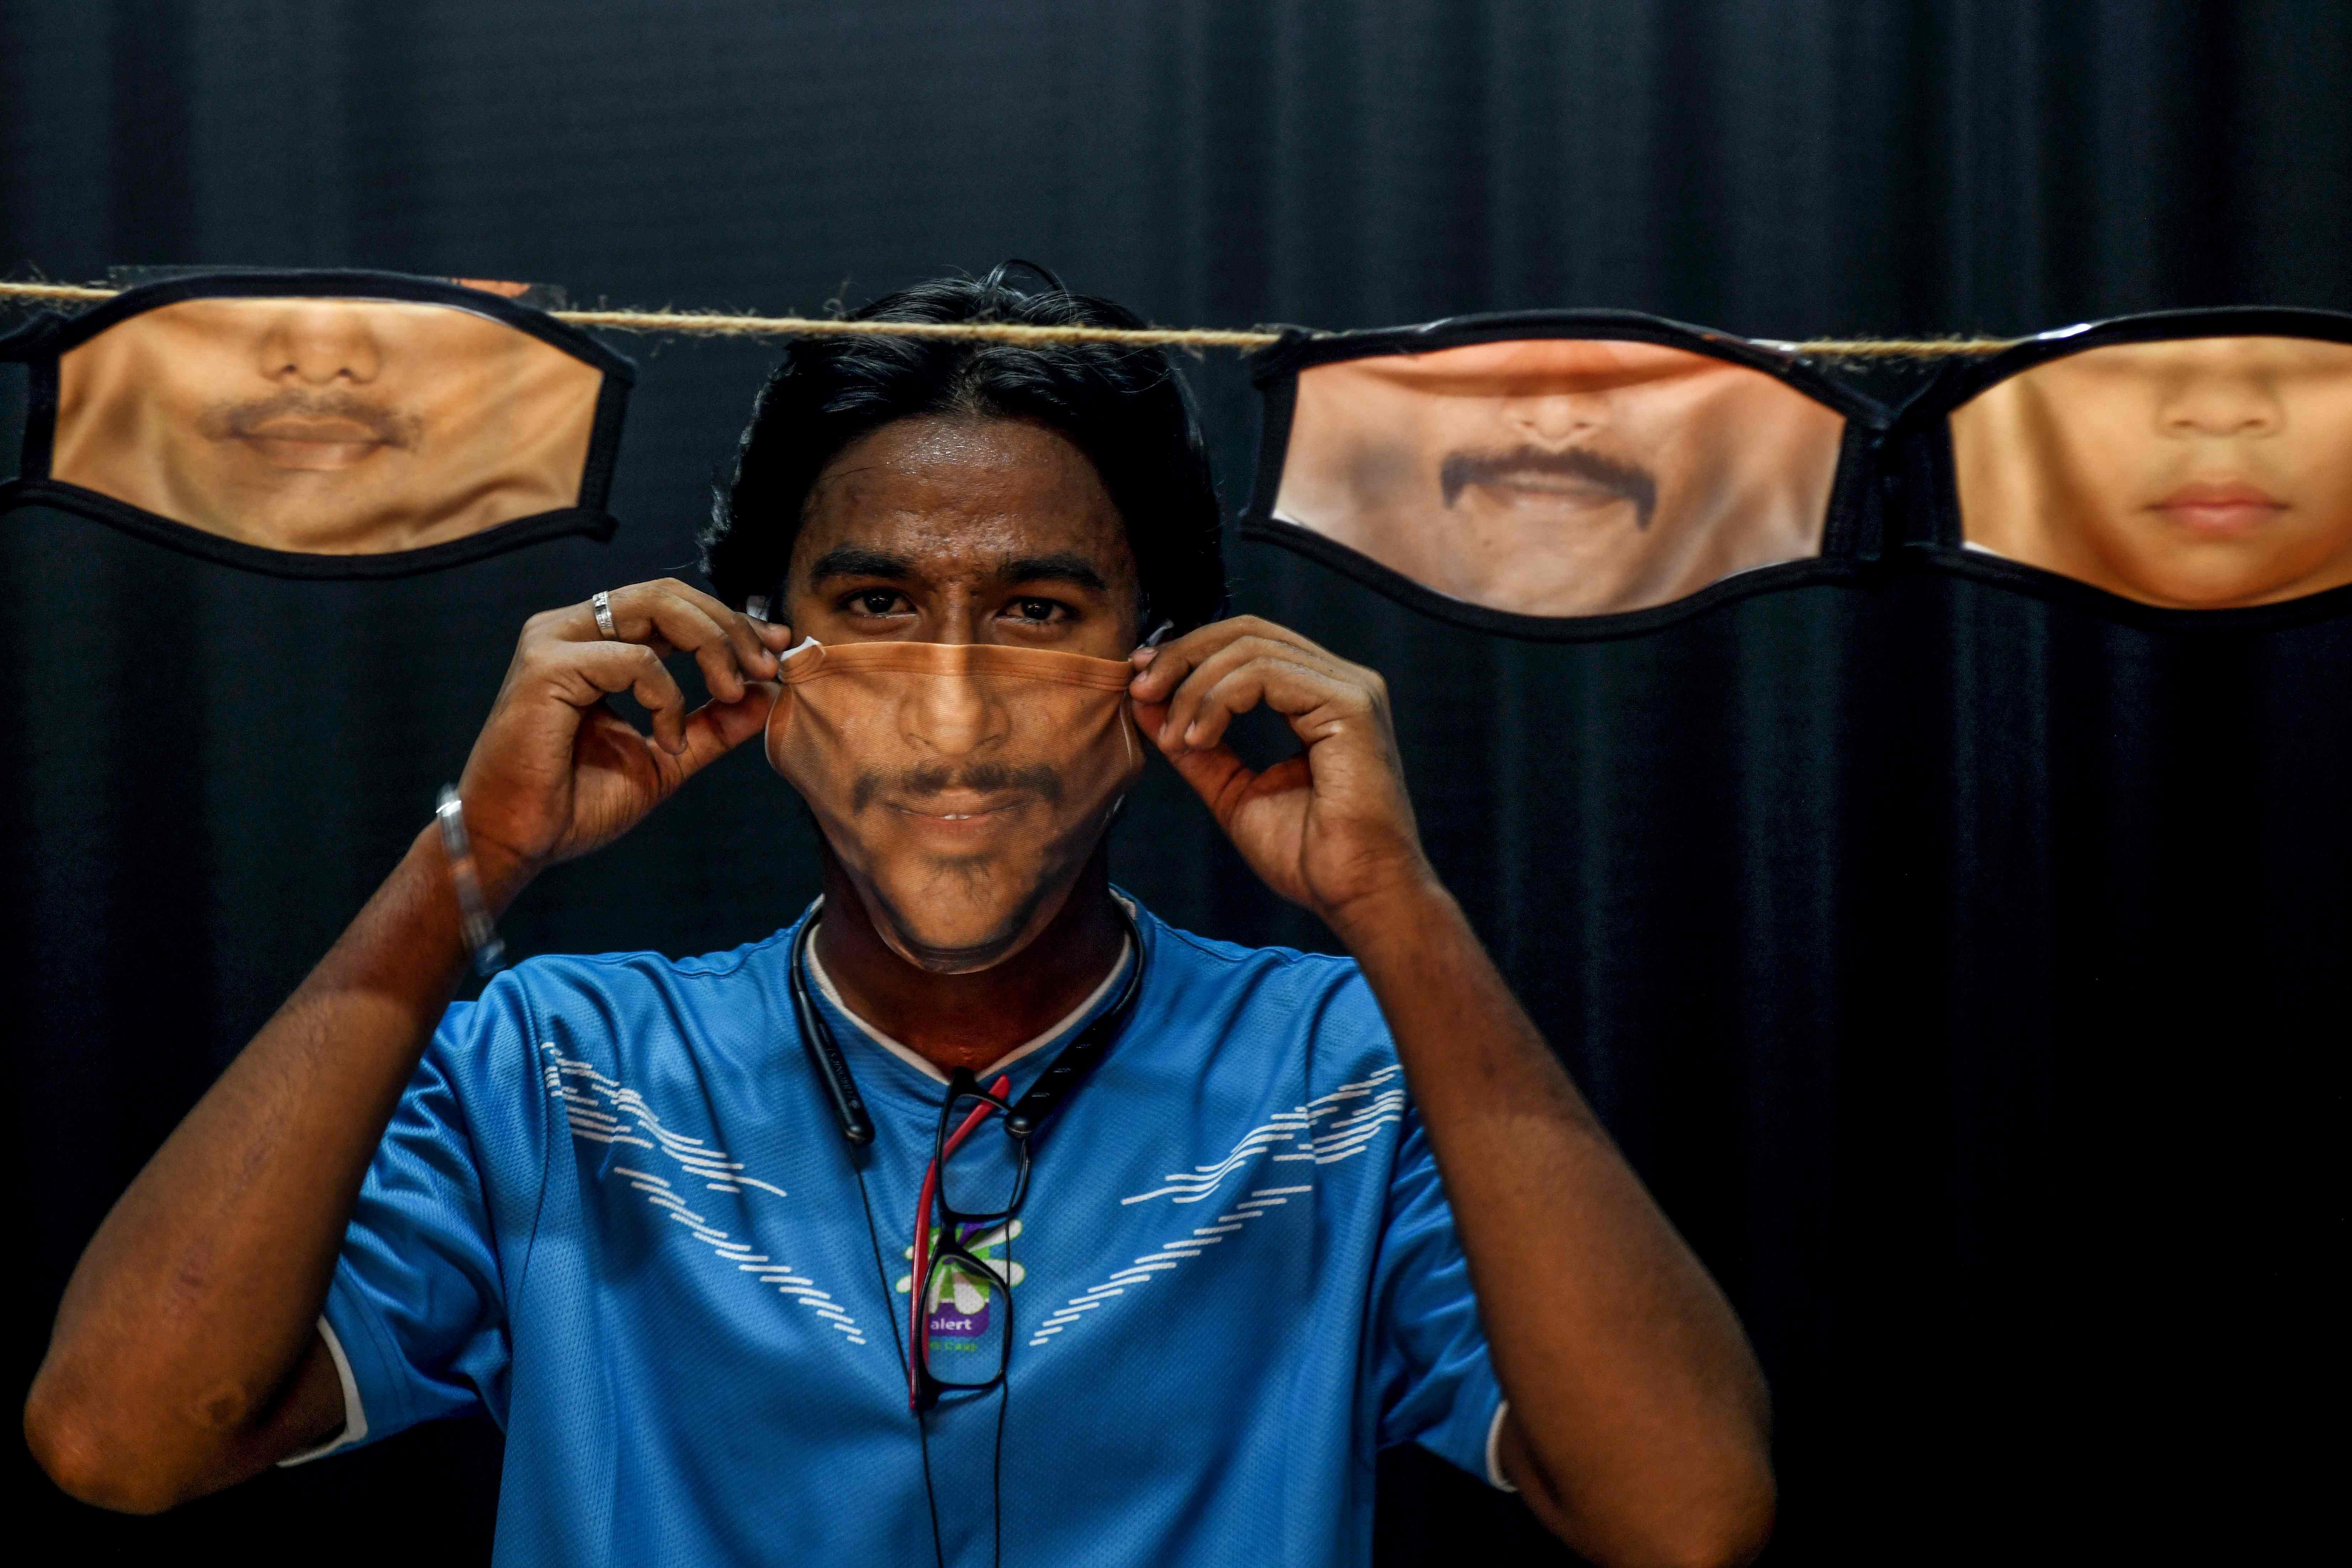 A man adjusts a facemask with his face's image printed on it created at a photo studio as other facemasks are hung amid concerns over the spread of the COVID-19 coronavirus in Chennai. (AFP photo)